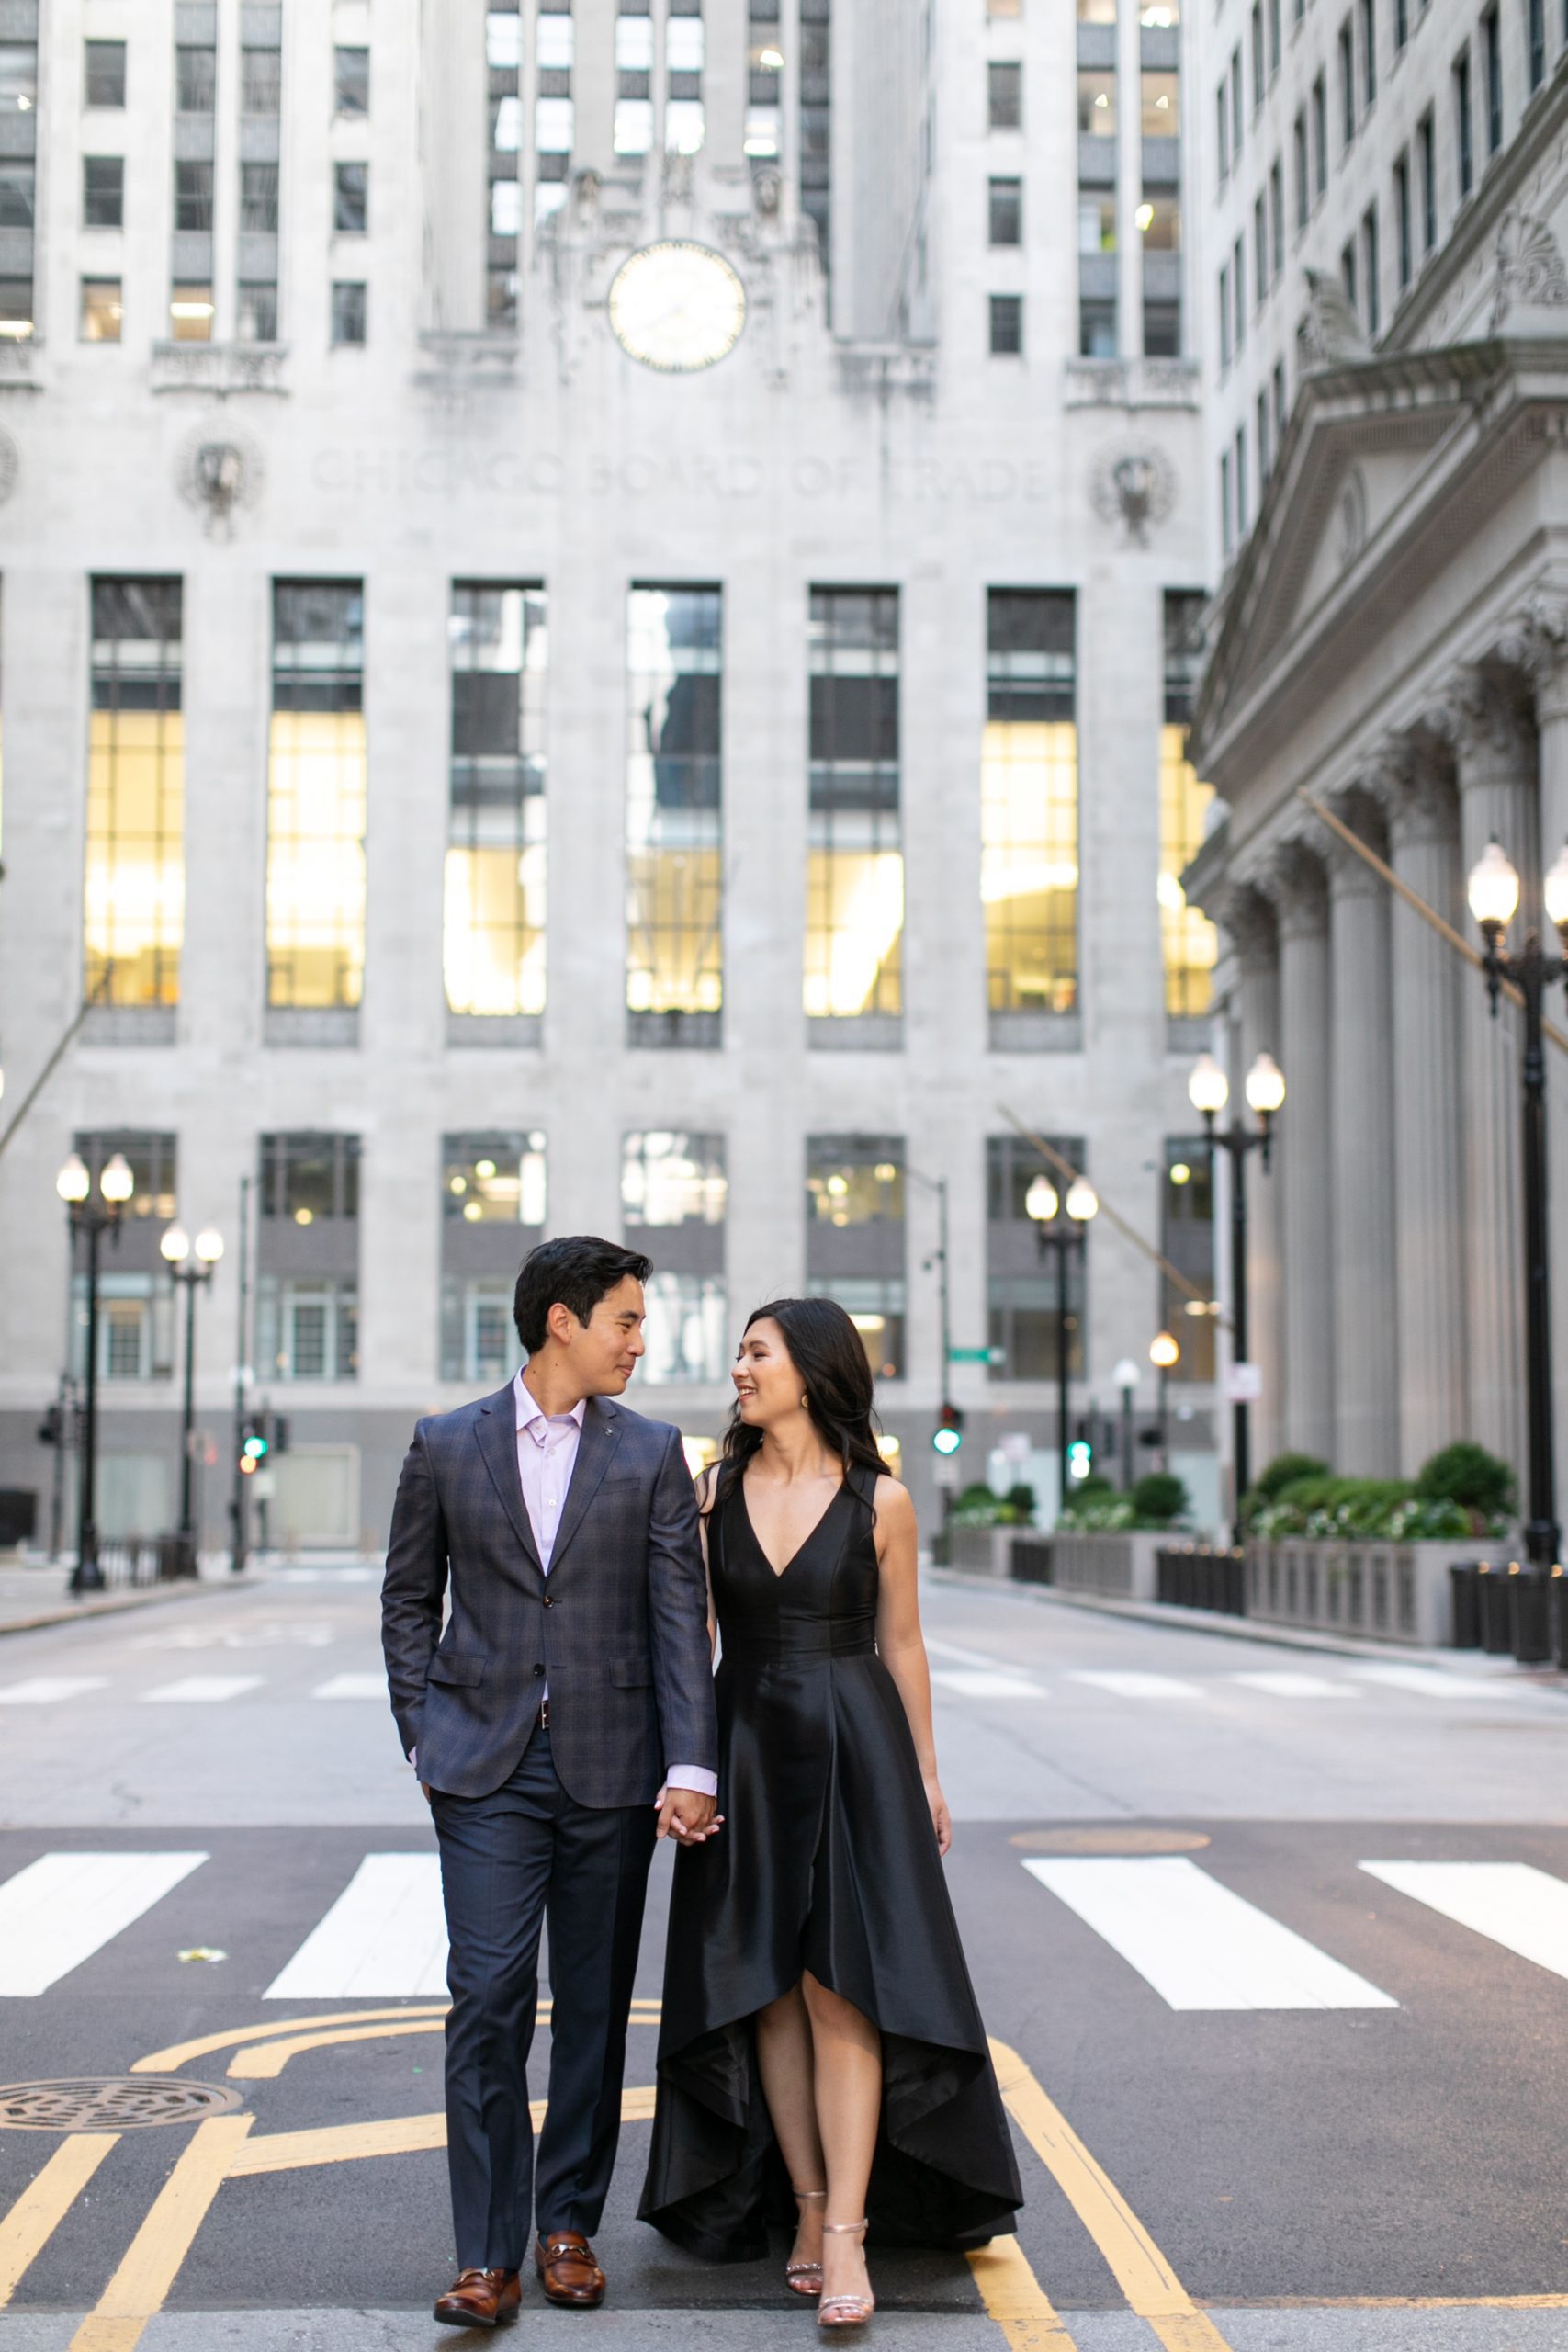 the couple walked in downtown Chicago during their summer engagement photo shoot